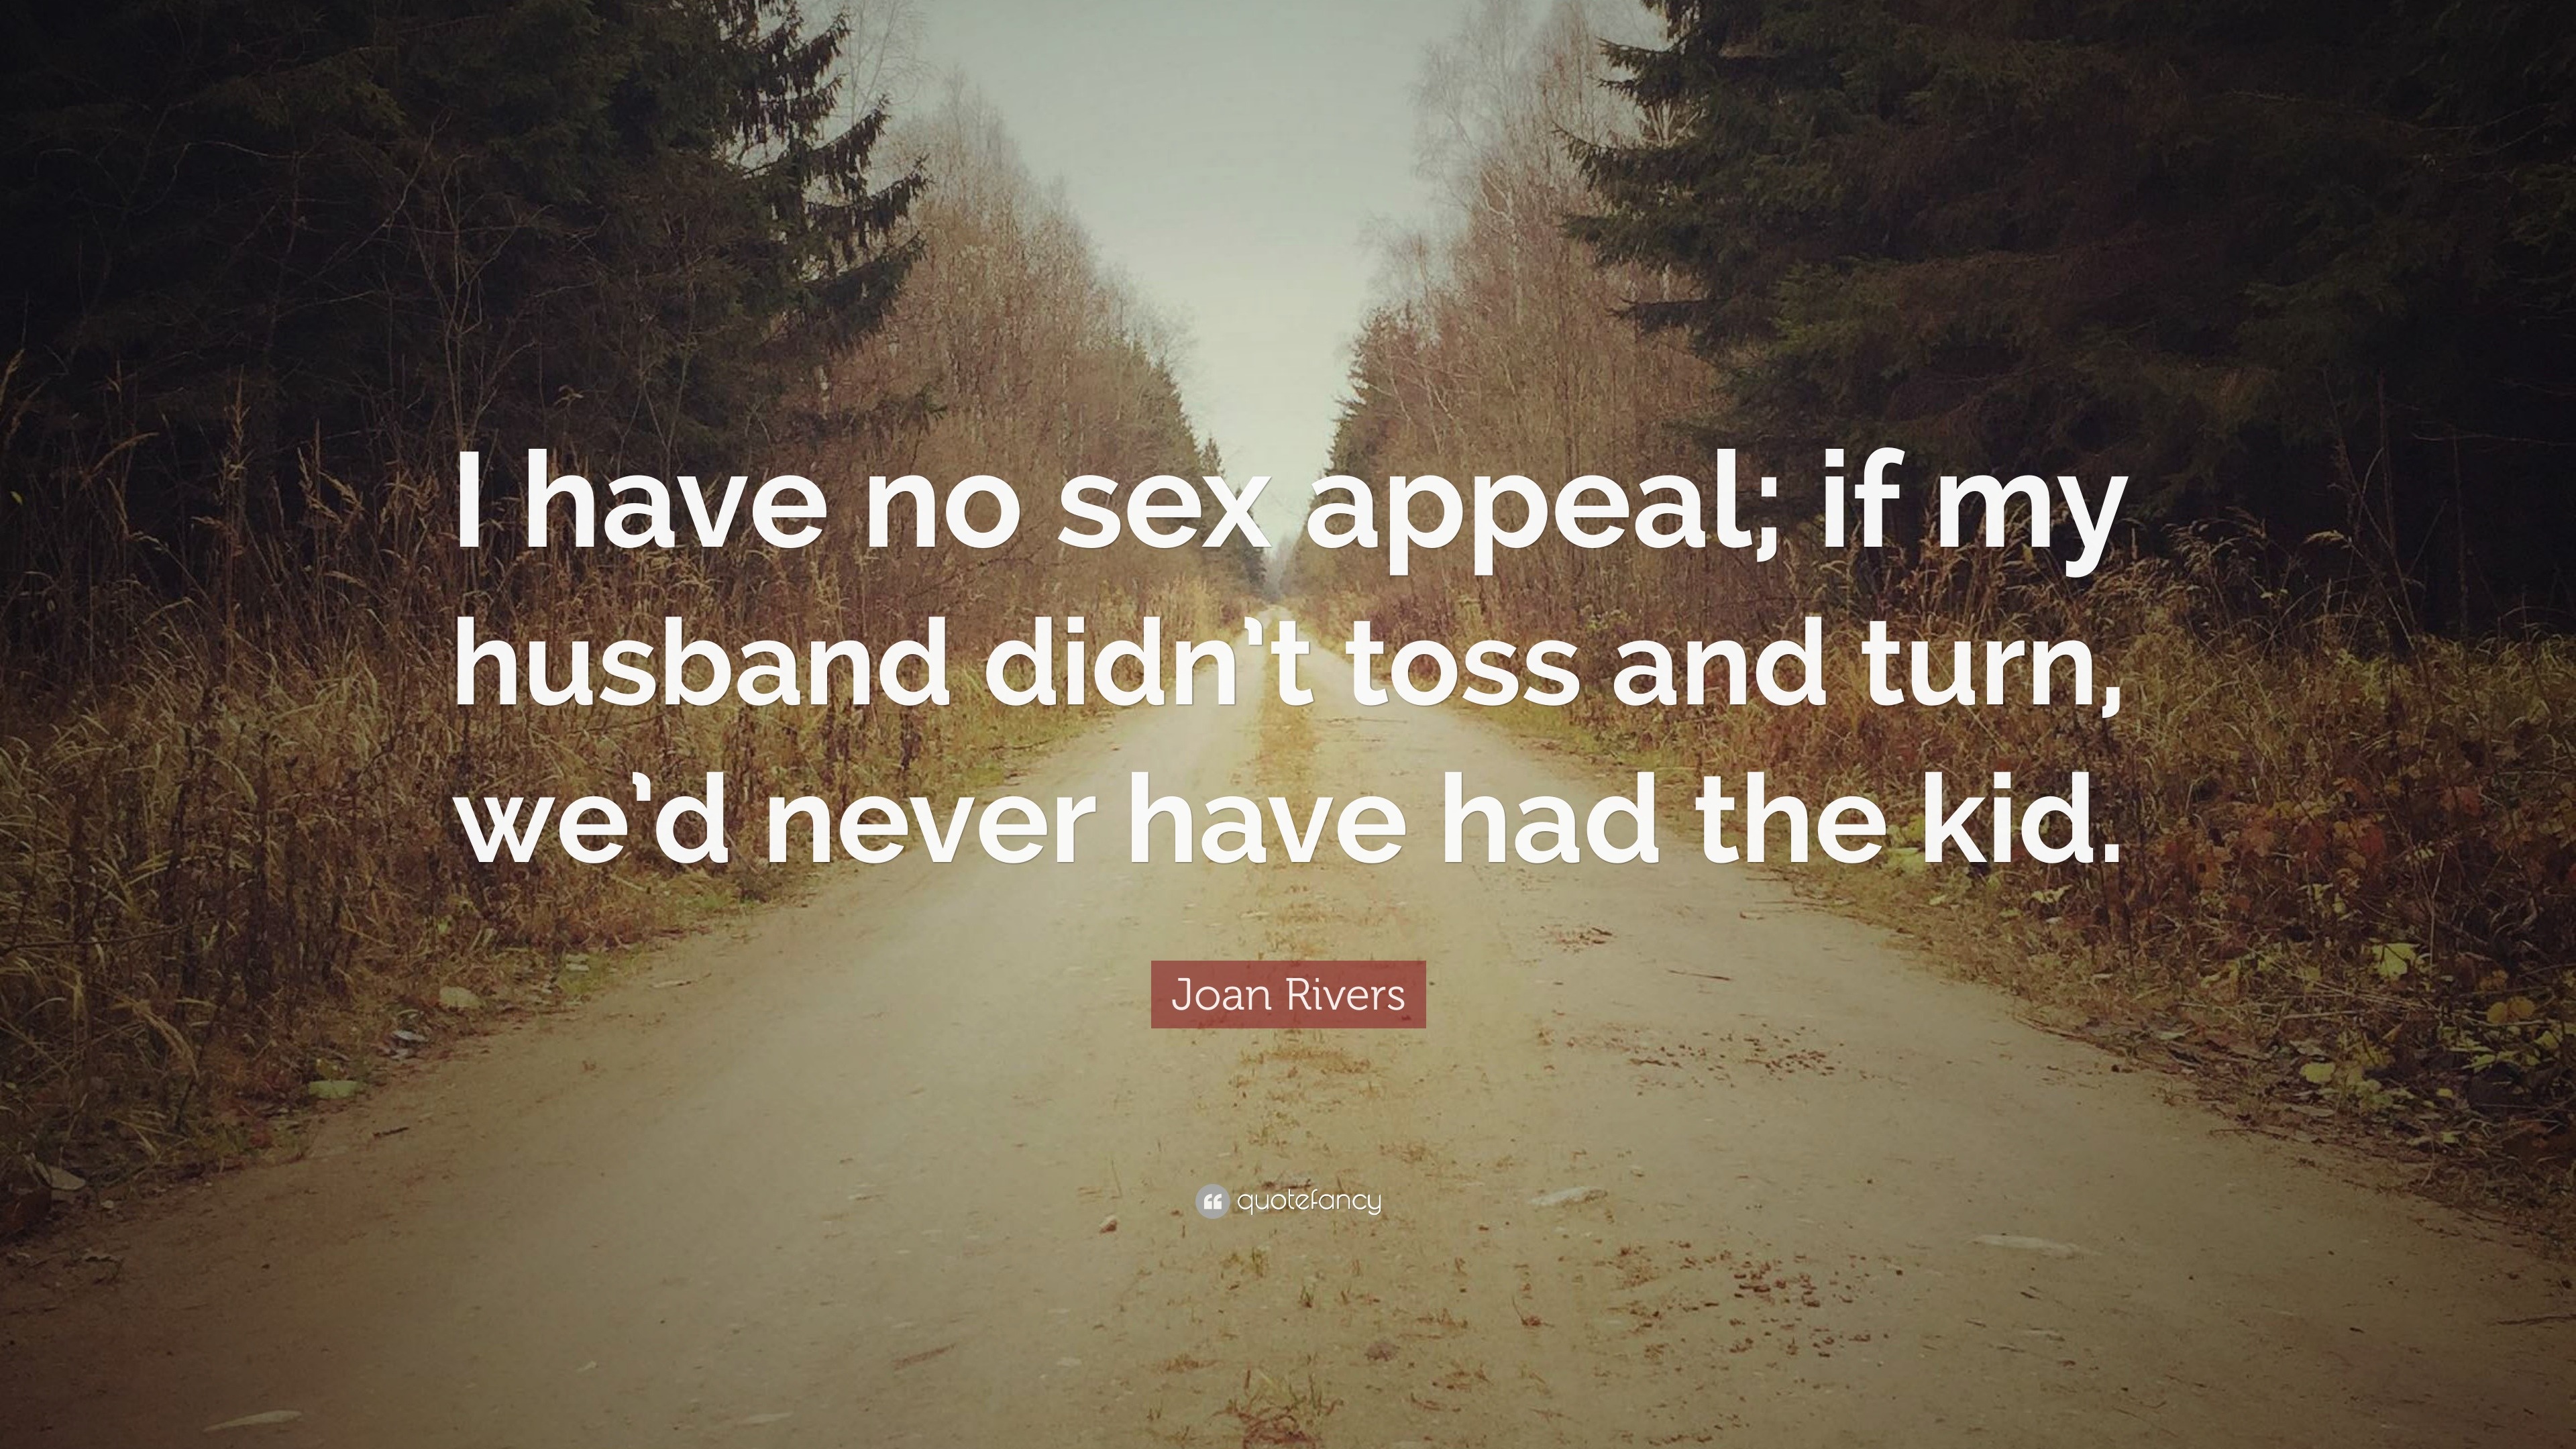 Joan Rivers Quote “I have no sex appeal; if my husband didnt toss and turn,